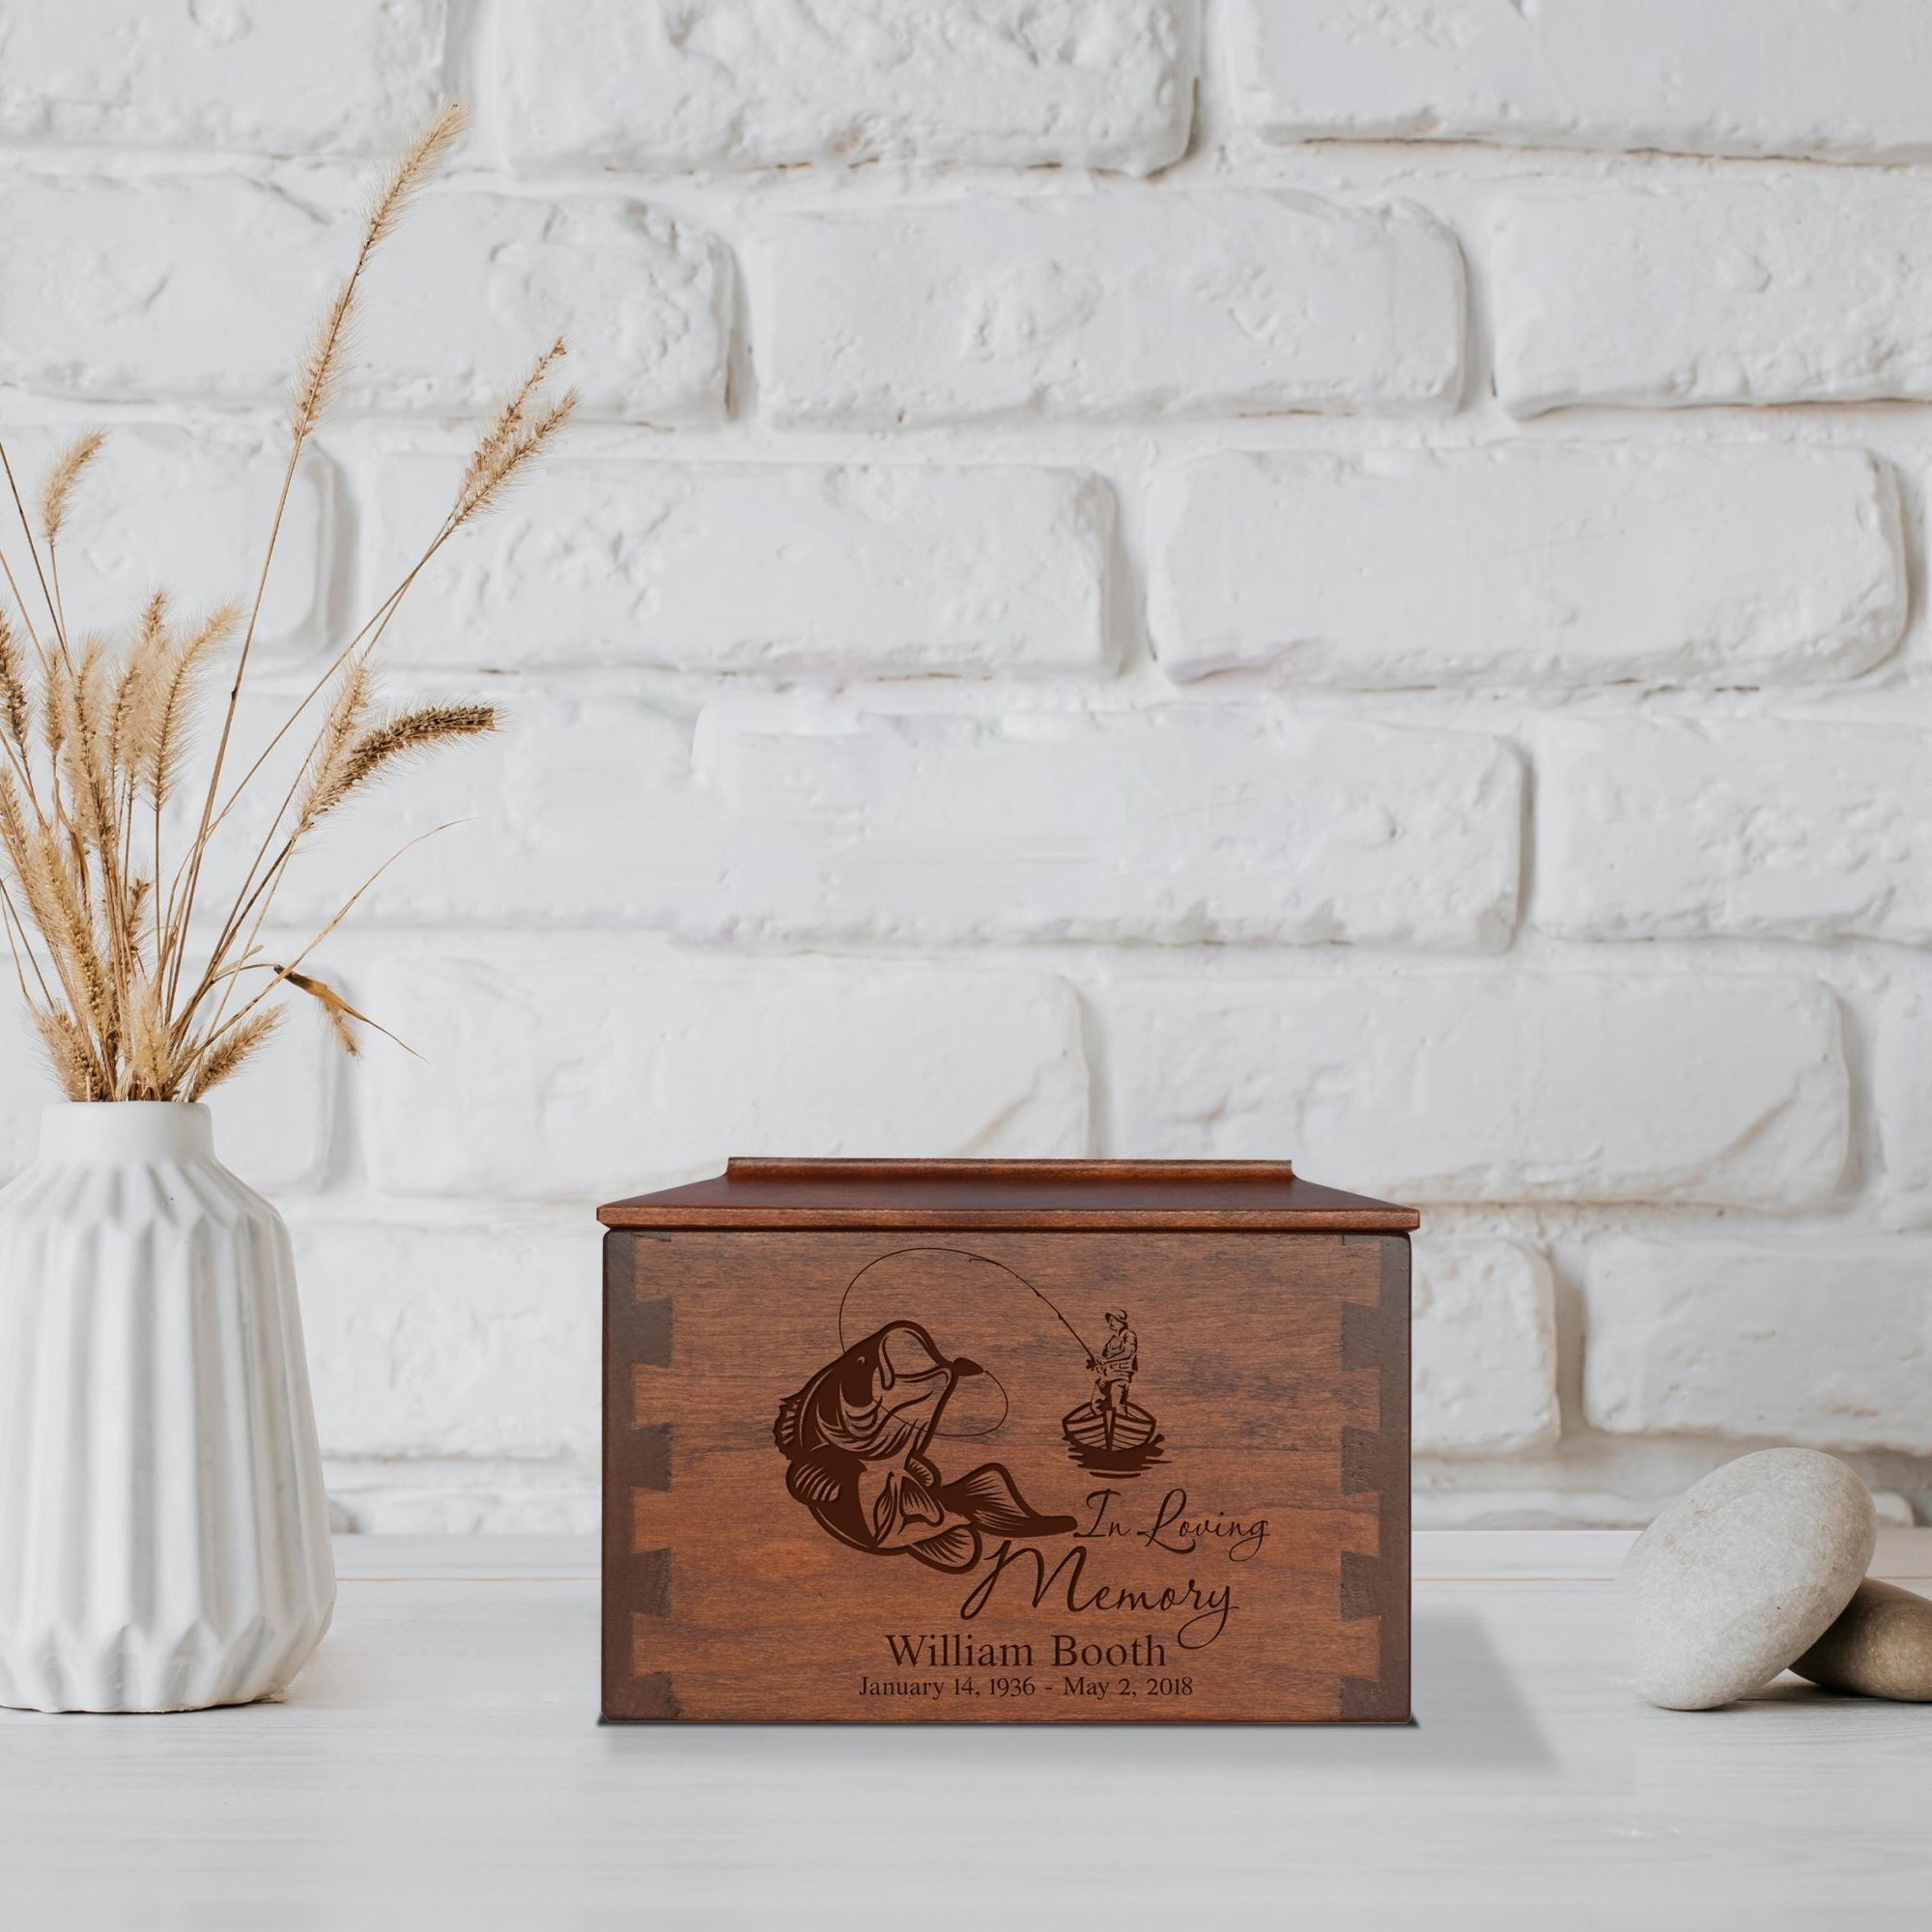 Custom Wooden Cremation Urn Box Small for Human Ashes holds 68 cu in In Loving Memory - LifeSong Milestones